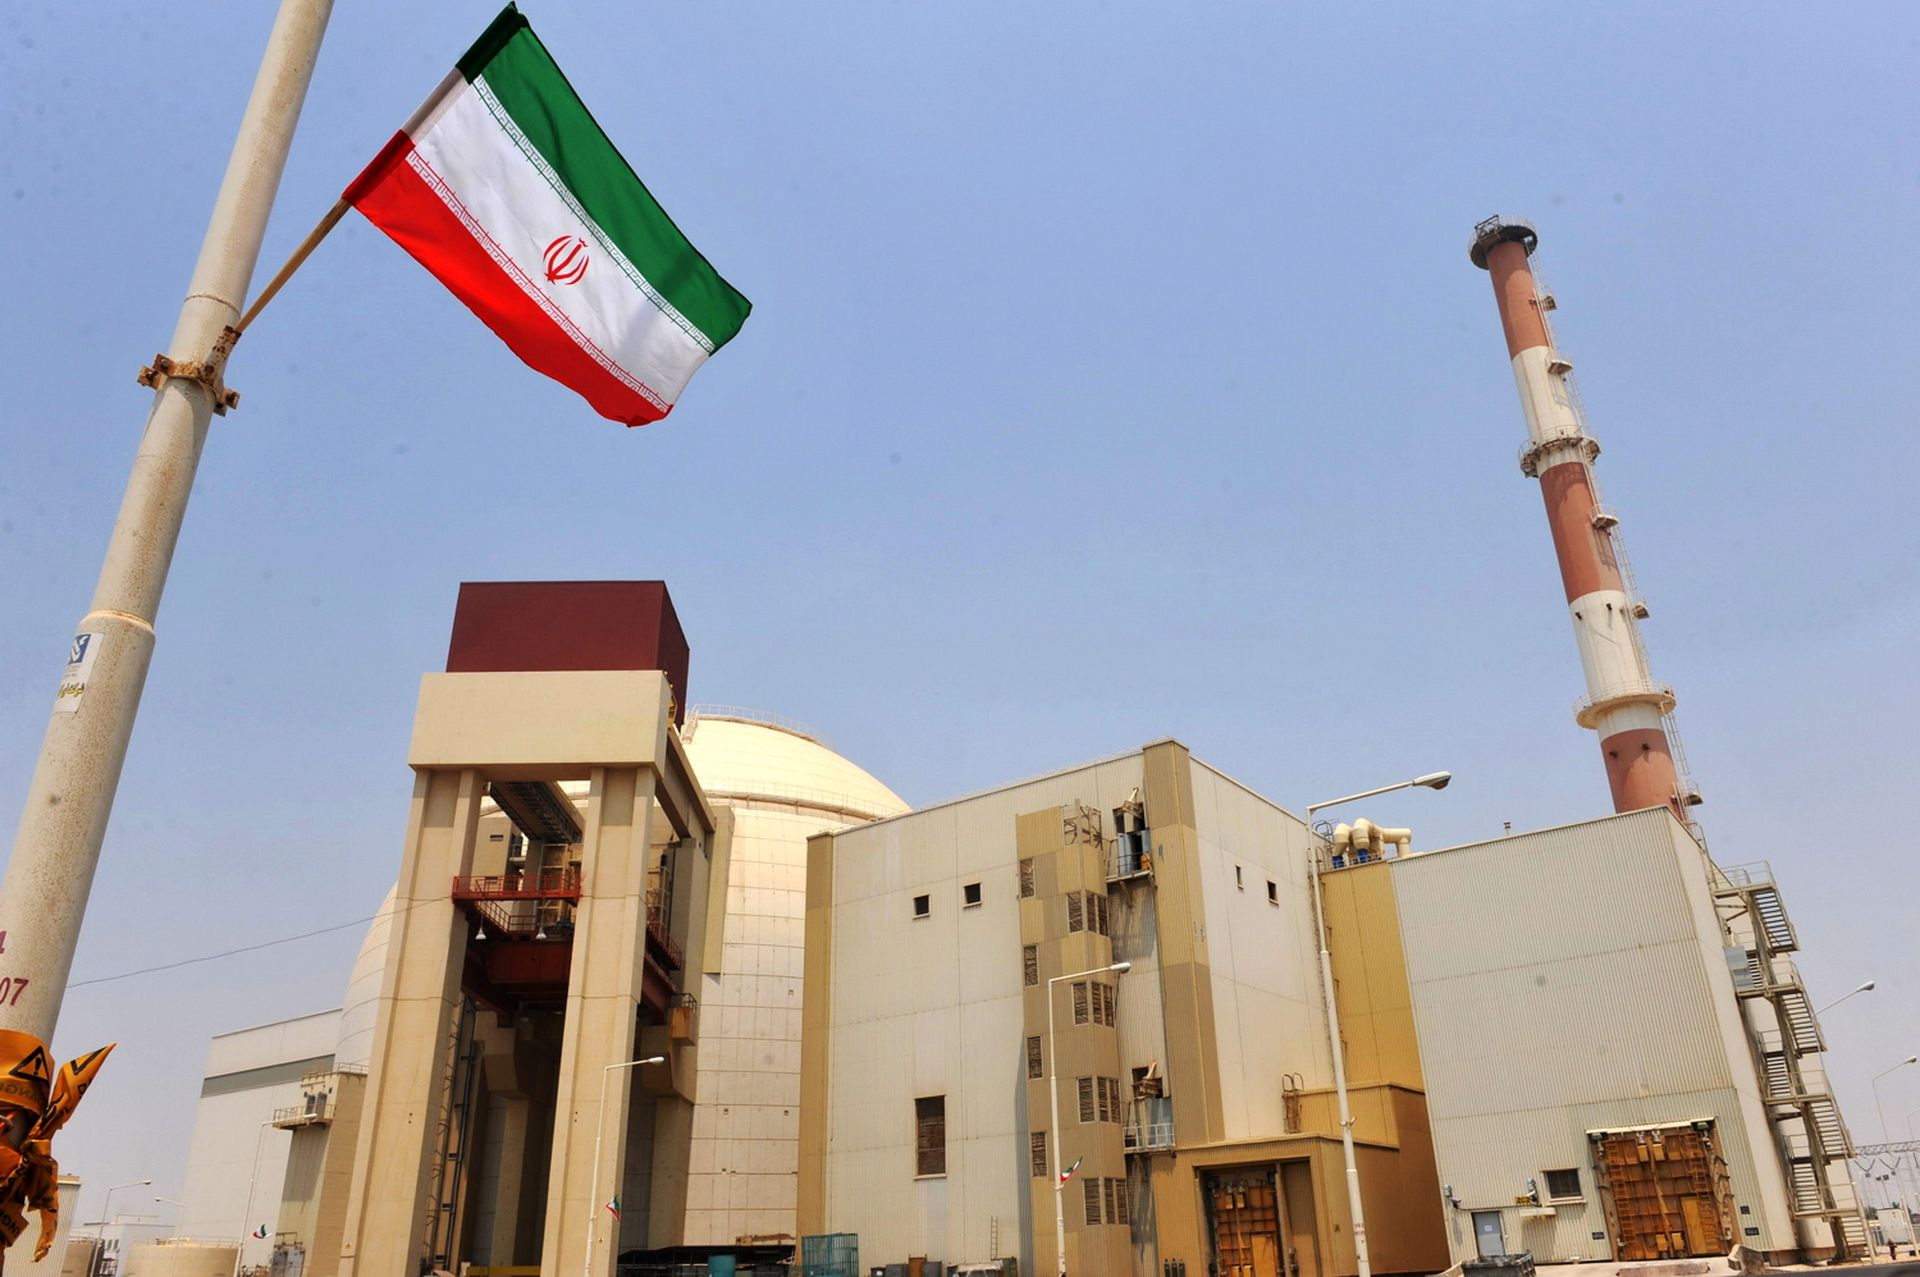 A view of the reactor building at the Russian-built Bushehr nuclear power plant on Aug. 21, 2010, in Bushehr, Iran. The Department of the Treasury announced economic sanctions Friday on an Iranian government intelligence agency and its head for engaging in cyberattacks against the United States and other countries. (Photo by IIPA via Getty Images)
...